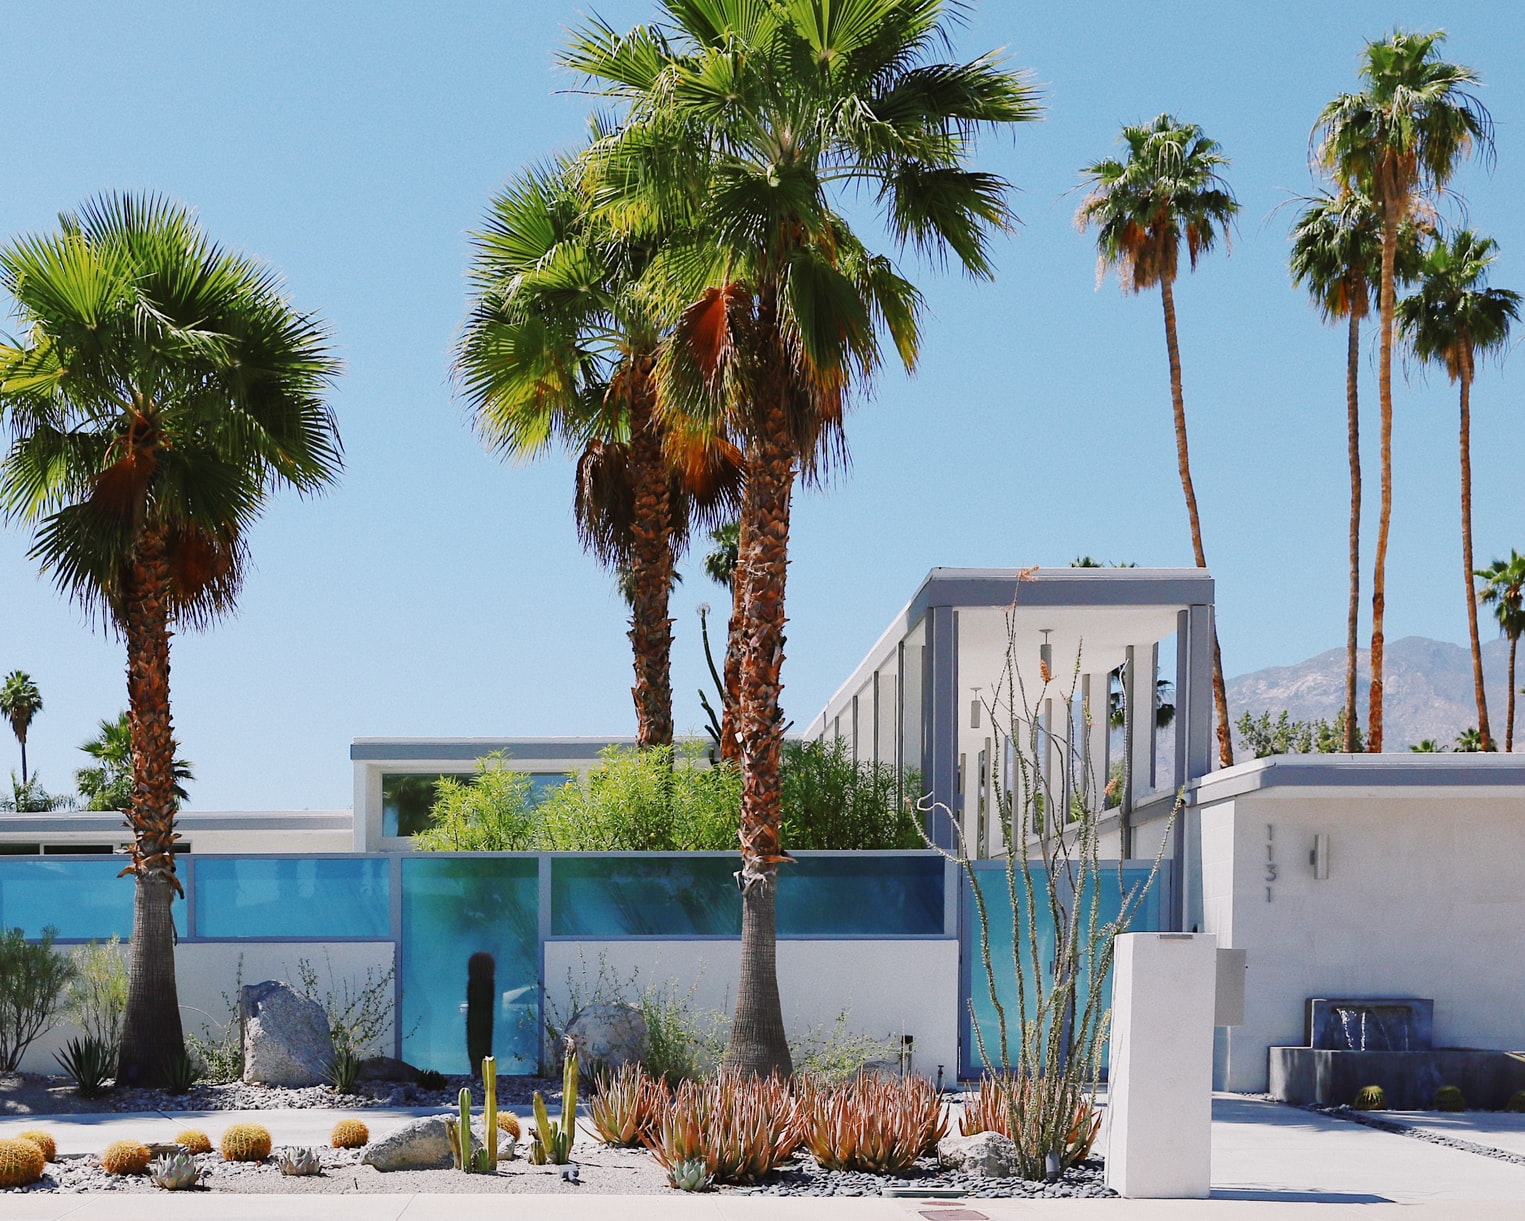 The Best Areas to Stay in Palm Springs and the Coachella Valley